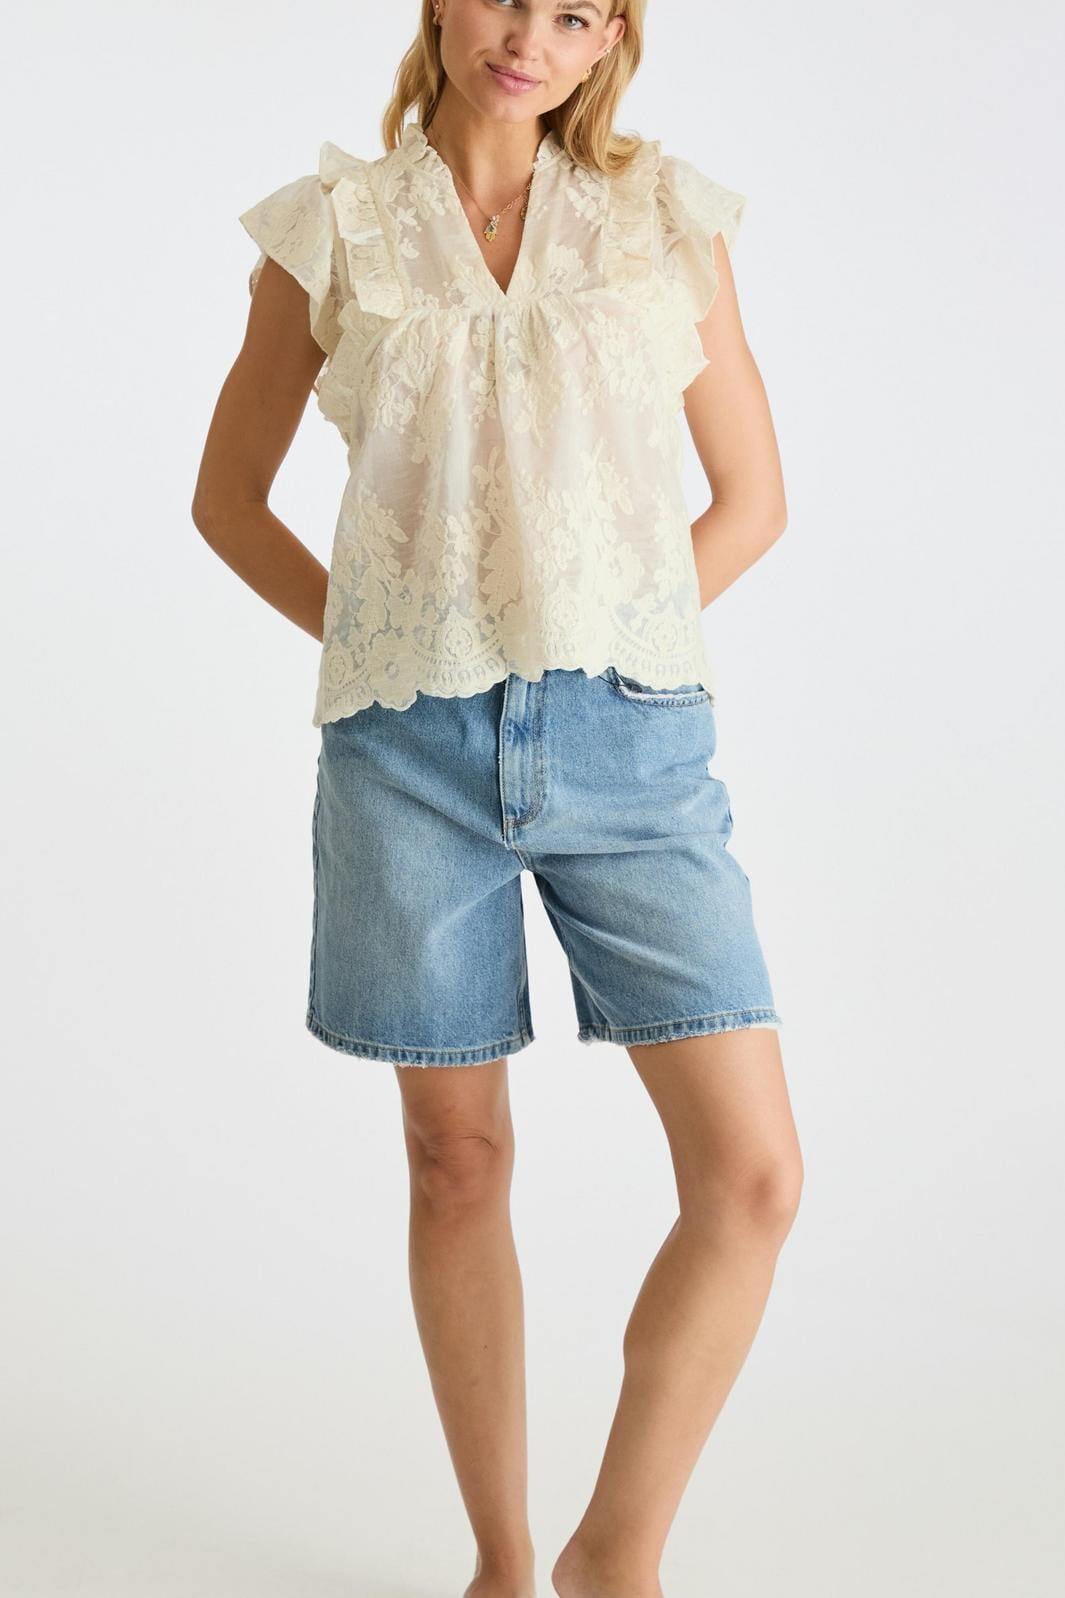 Neo Noir - Jayla Big Embroidery Top - Off White